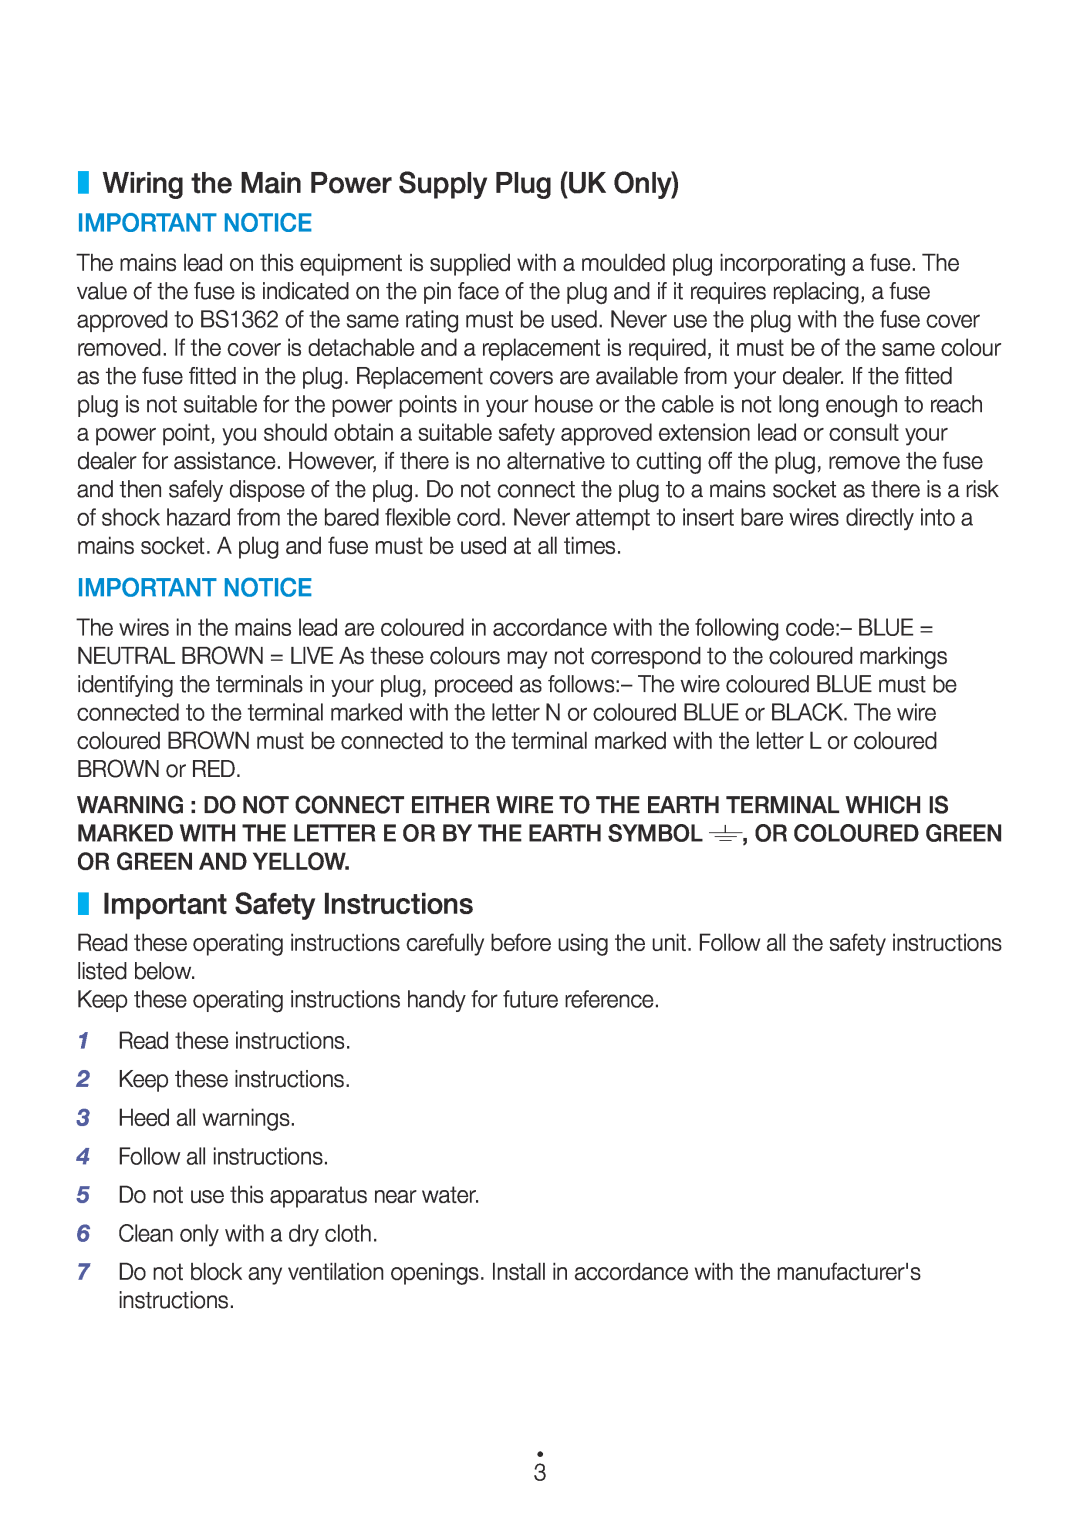 Samsung M5 user manual Wiring the Main Power Supply Plug UK Only, Important Safety Instructions, Important Notice 